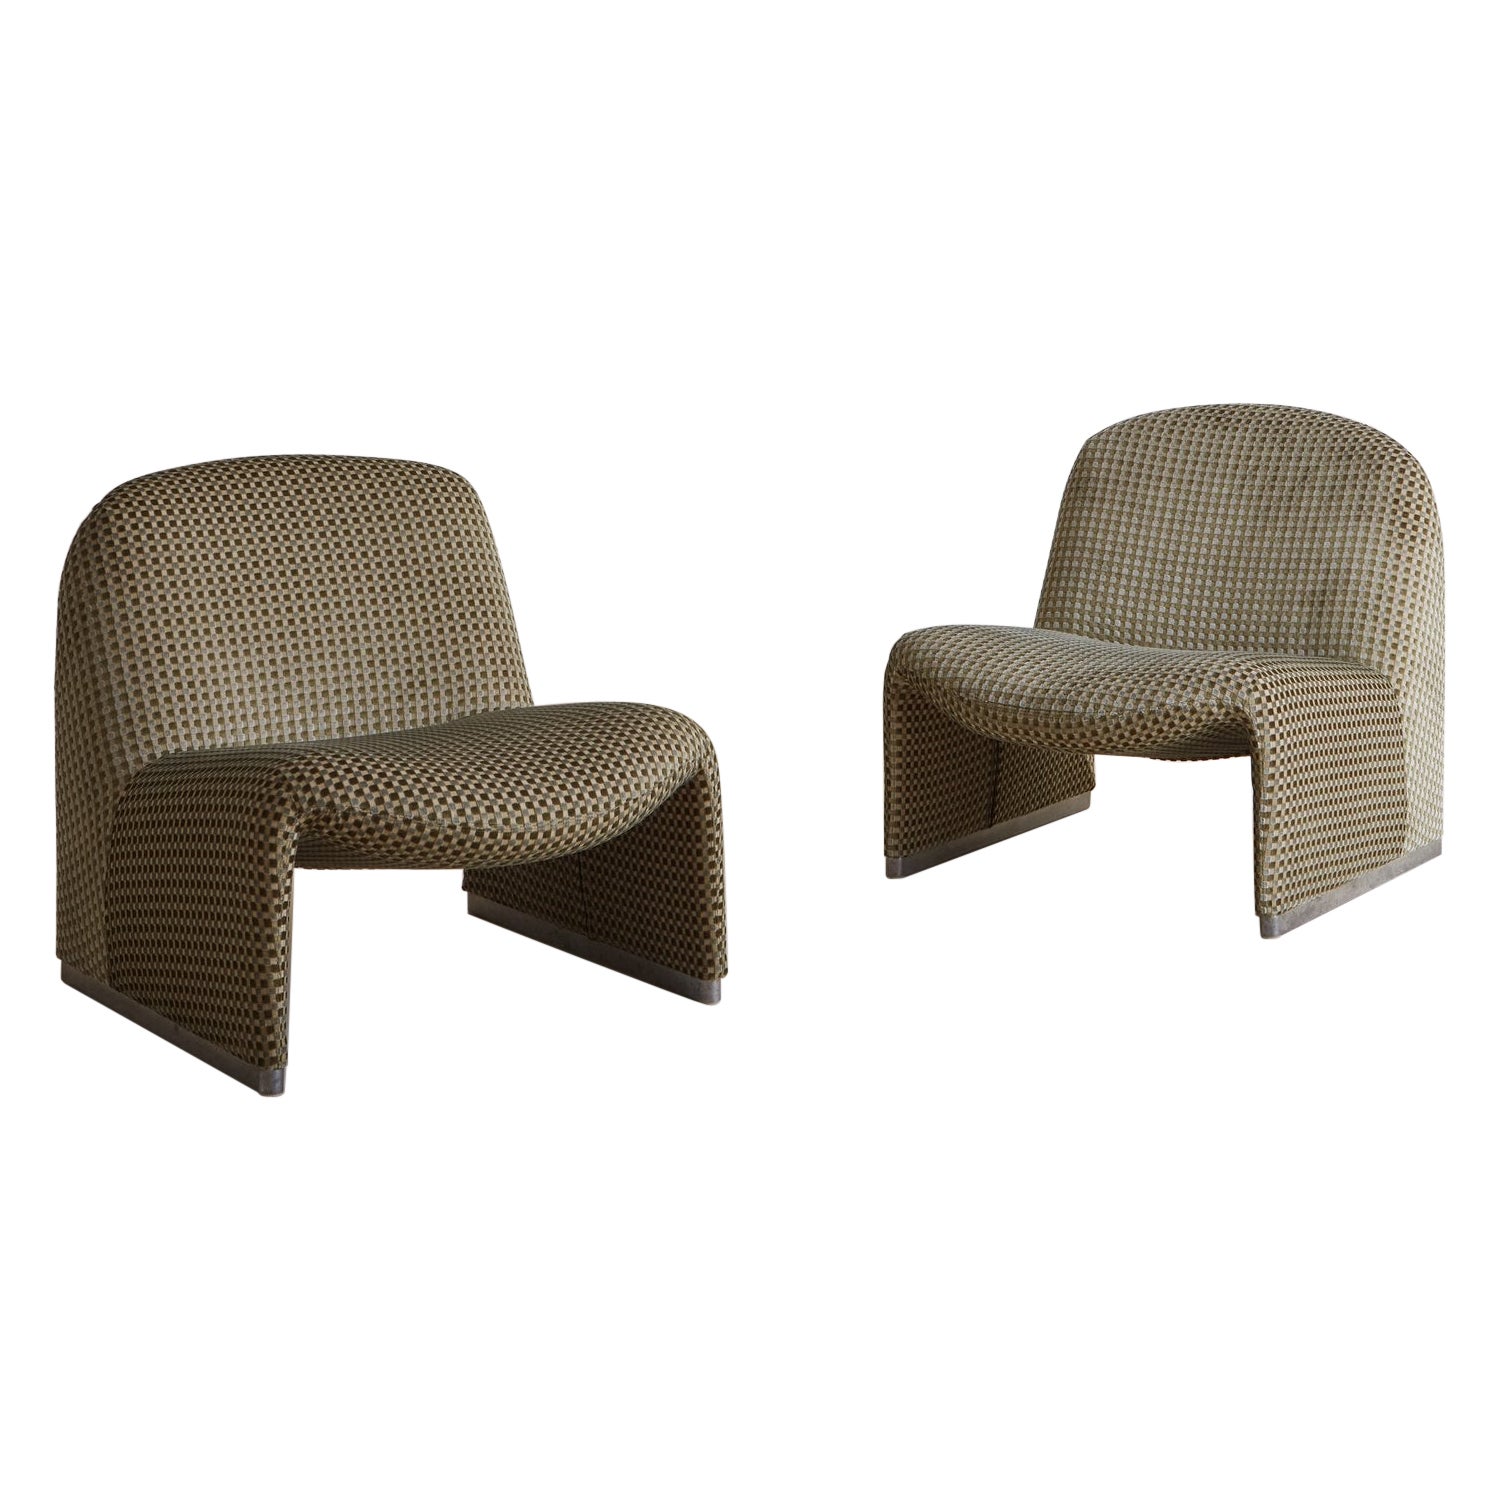 Pair of Alky Chairs in Checkered Green Velvet by Giancarlo Piretti for Castelli